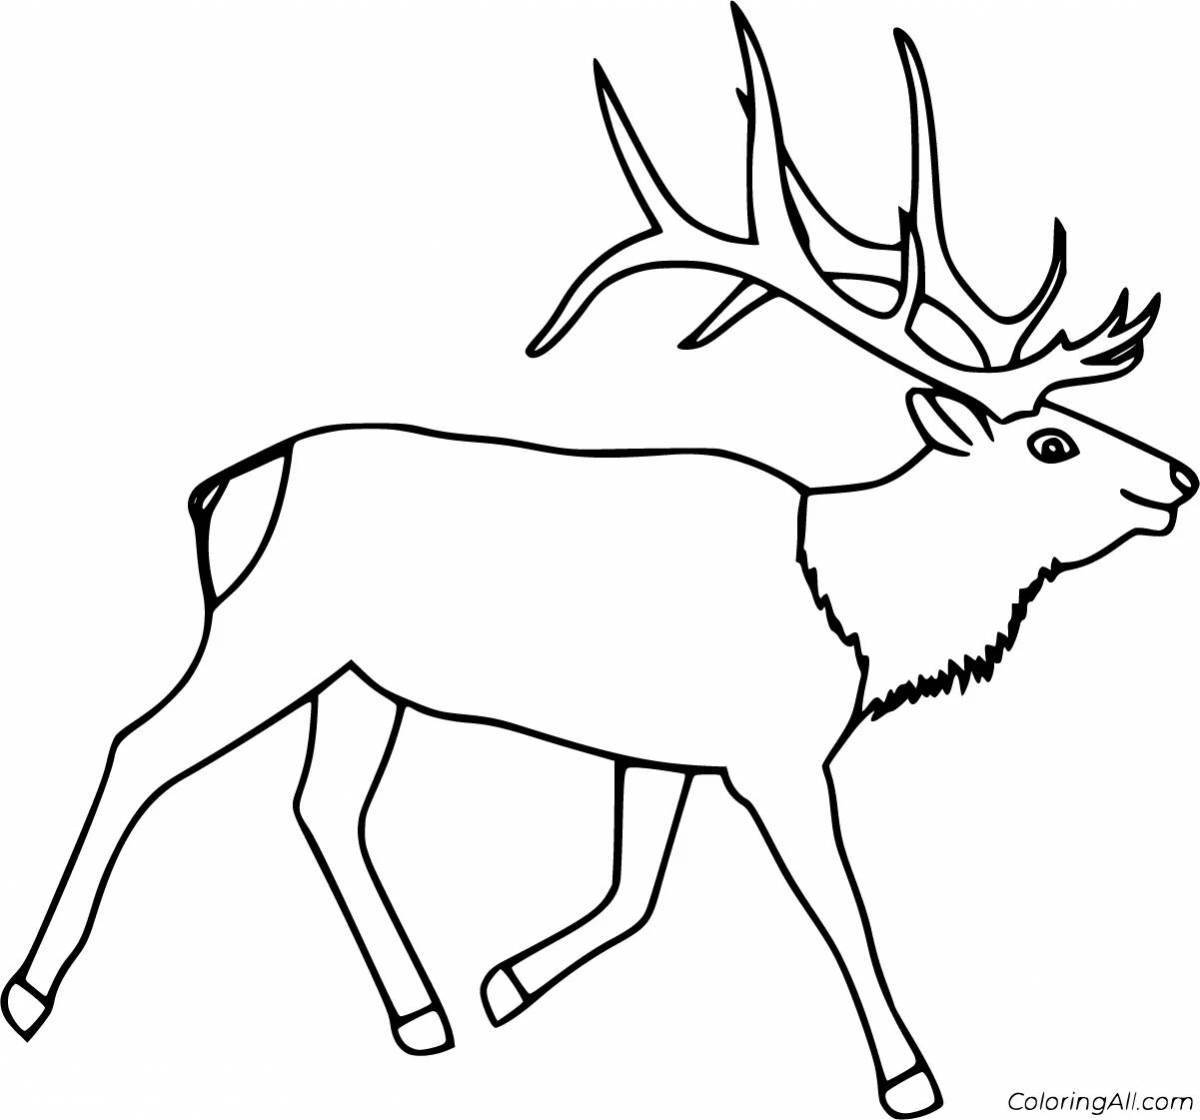 Attractive tundra animal coloring page